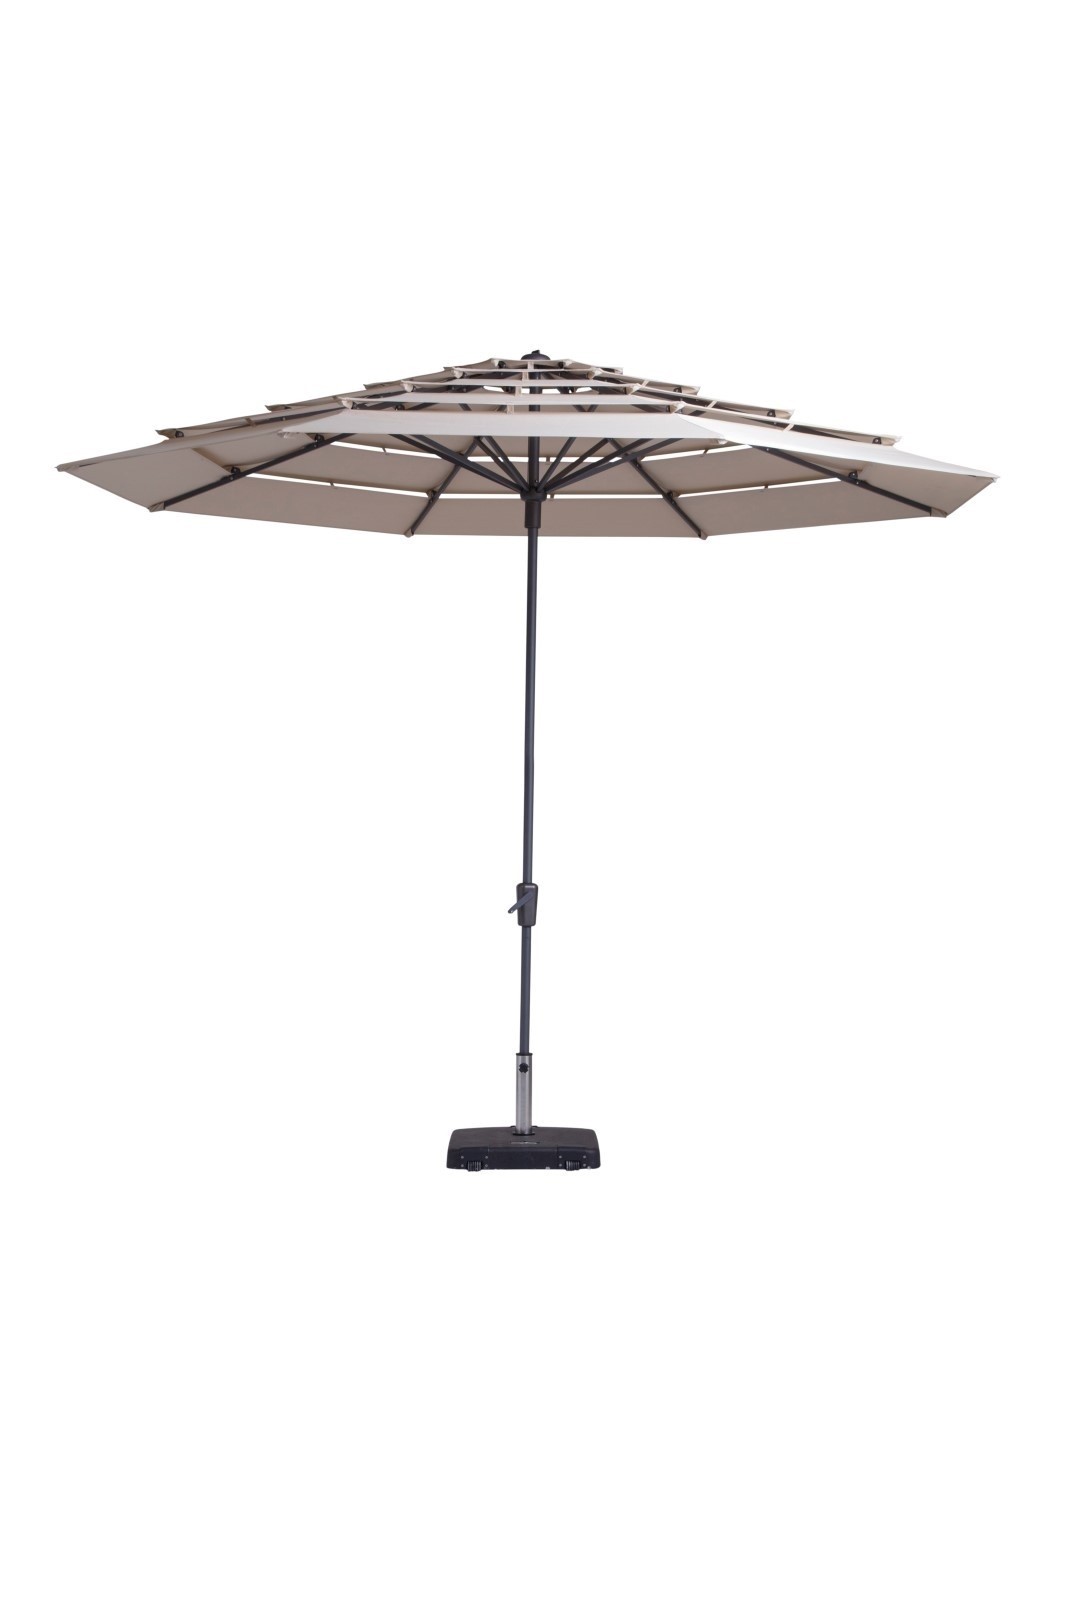 https://www.warentuin.nl/media/catalog/product/S/C/SCAN8713229624675_madison_parasol_syros_open_air_350_cm_polyester_grey_madison_d2ff.jpg